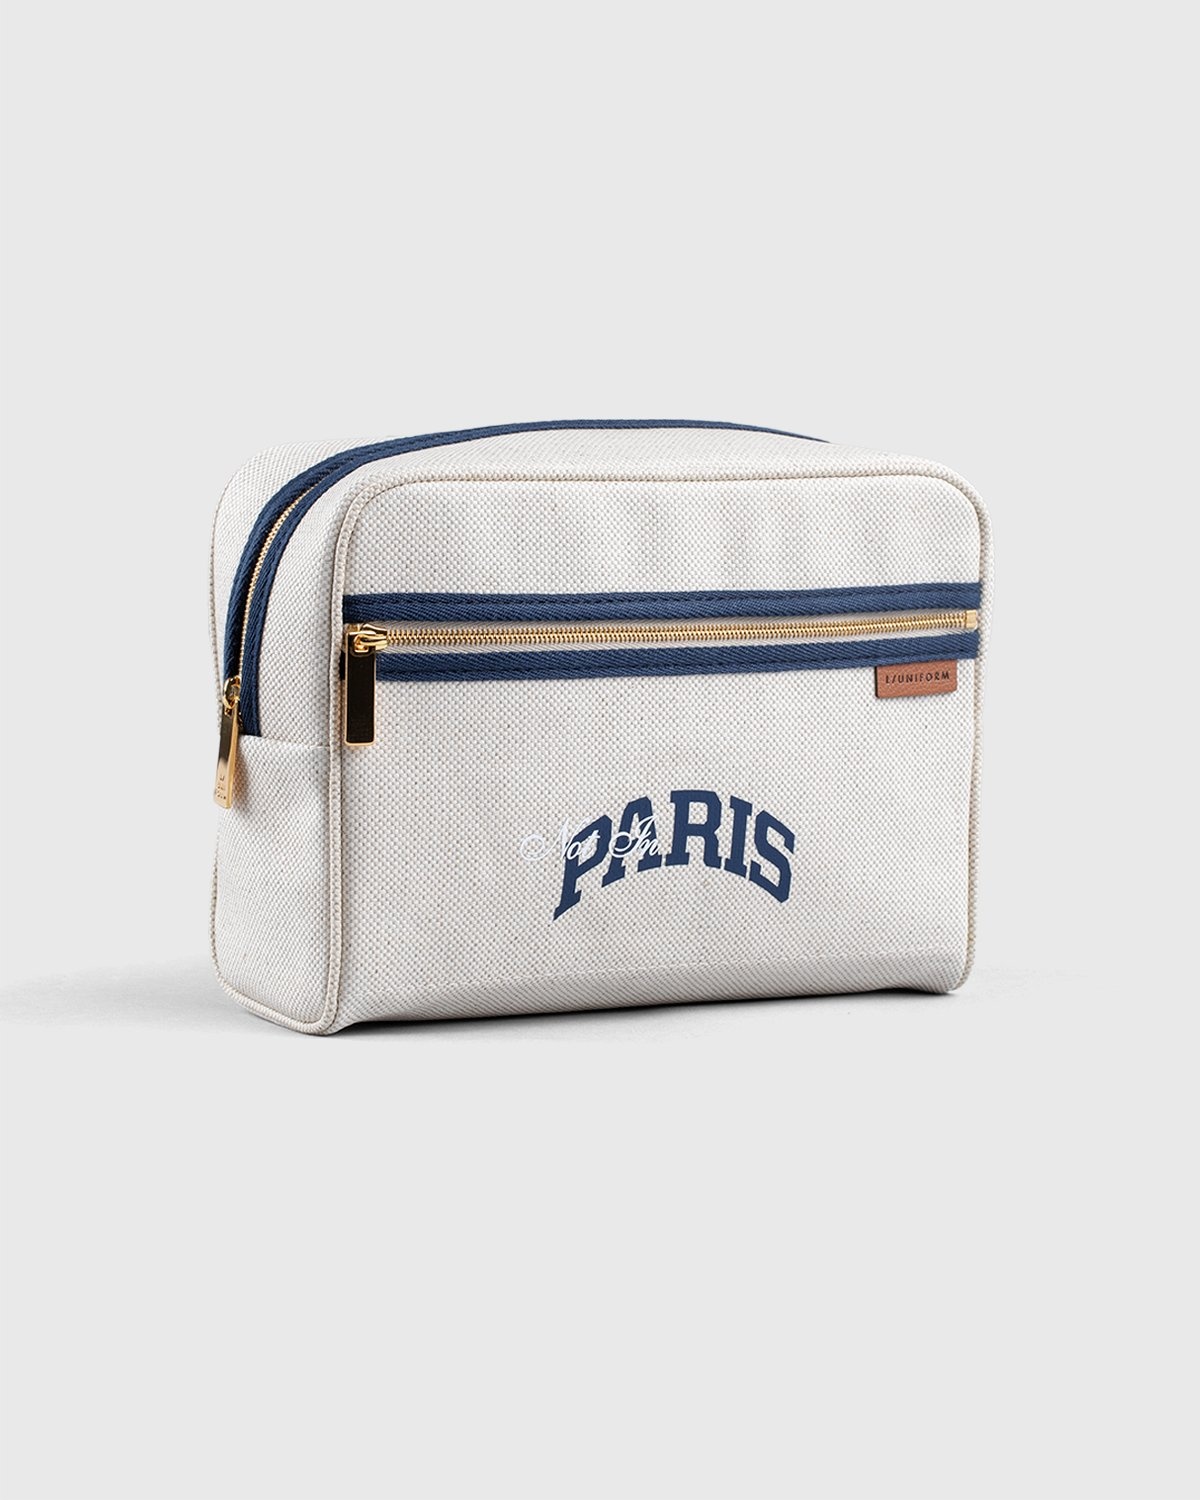 L/UNIFORM x Highsnobiety – Toiletry Bag - Cosmetic Cases - Beige - Image 5